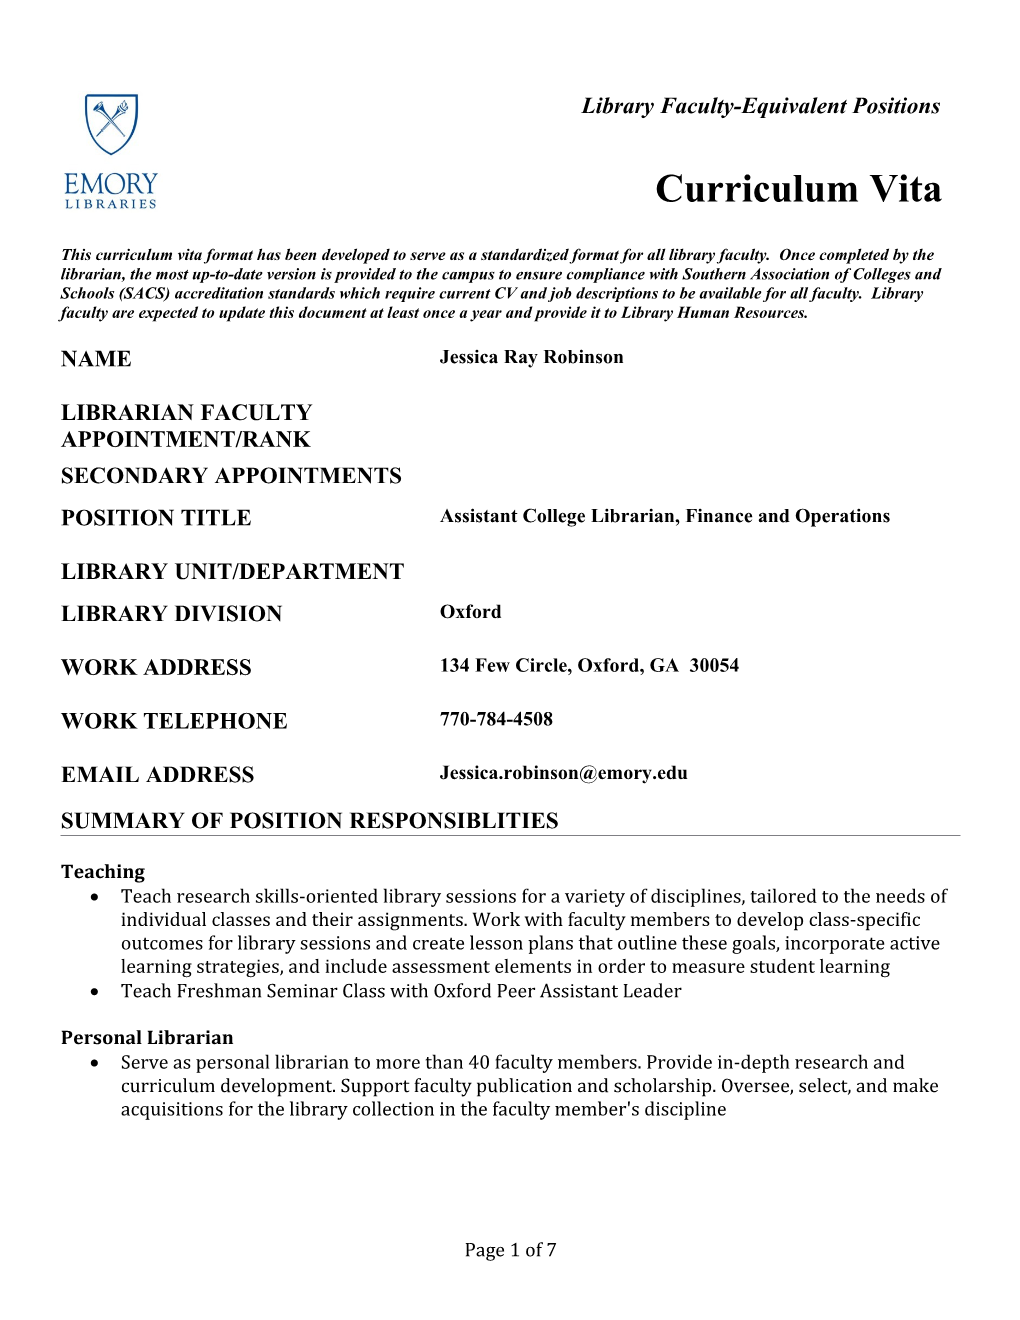 This Curriculum Vita Format Has Been Developed to Serve As a Standardized Format for All